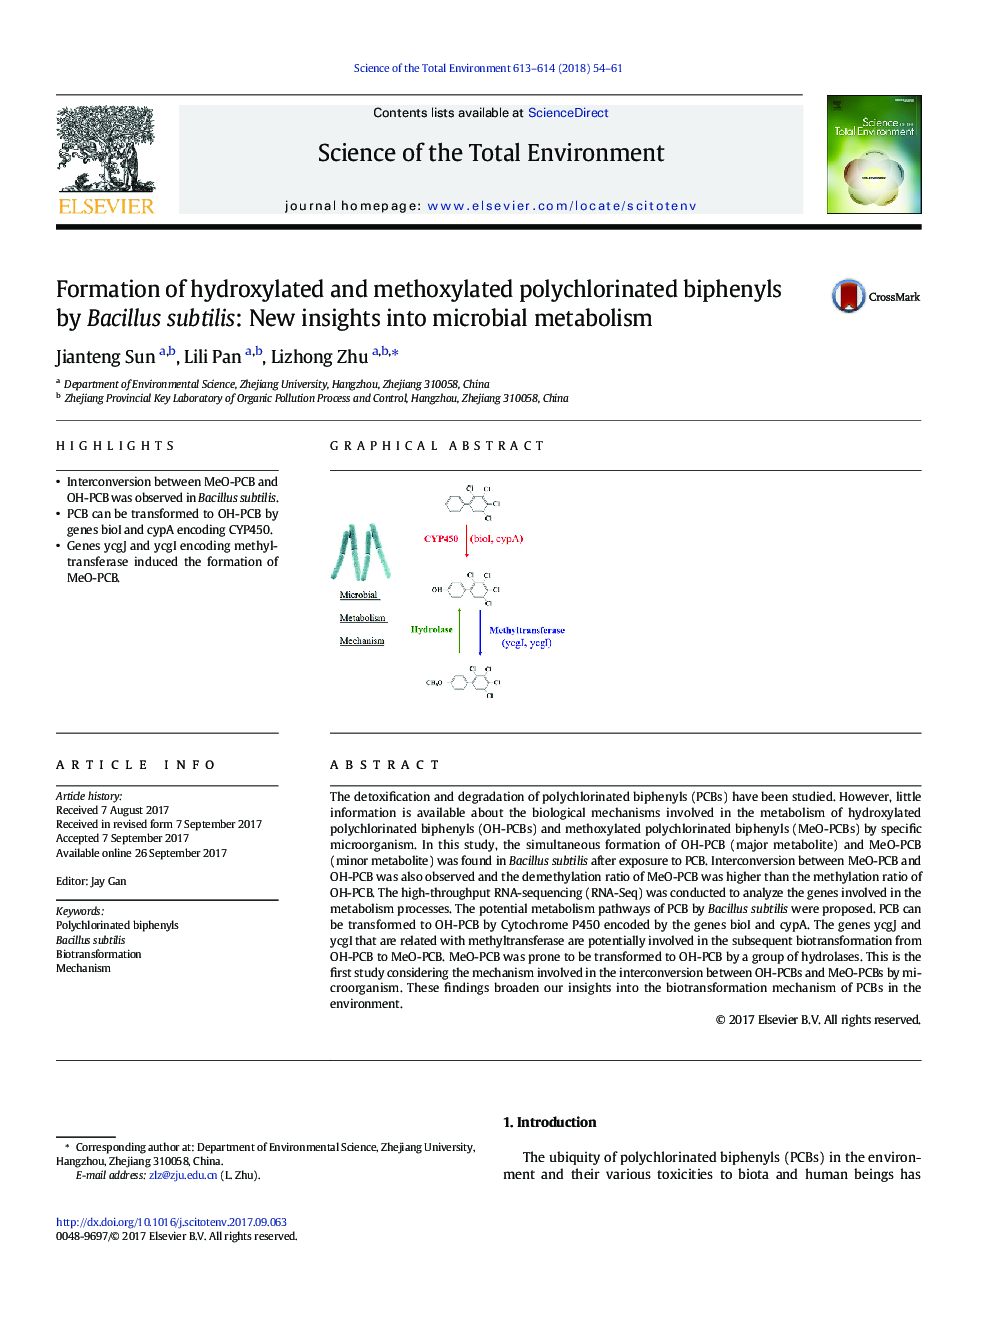 Formation of hydroxylated and methoxylated polychlorinated biphenyls by Bacillus subtilis: New insights into microbial metabolism